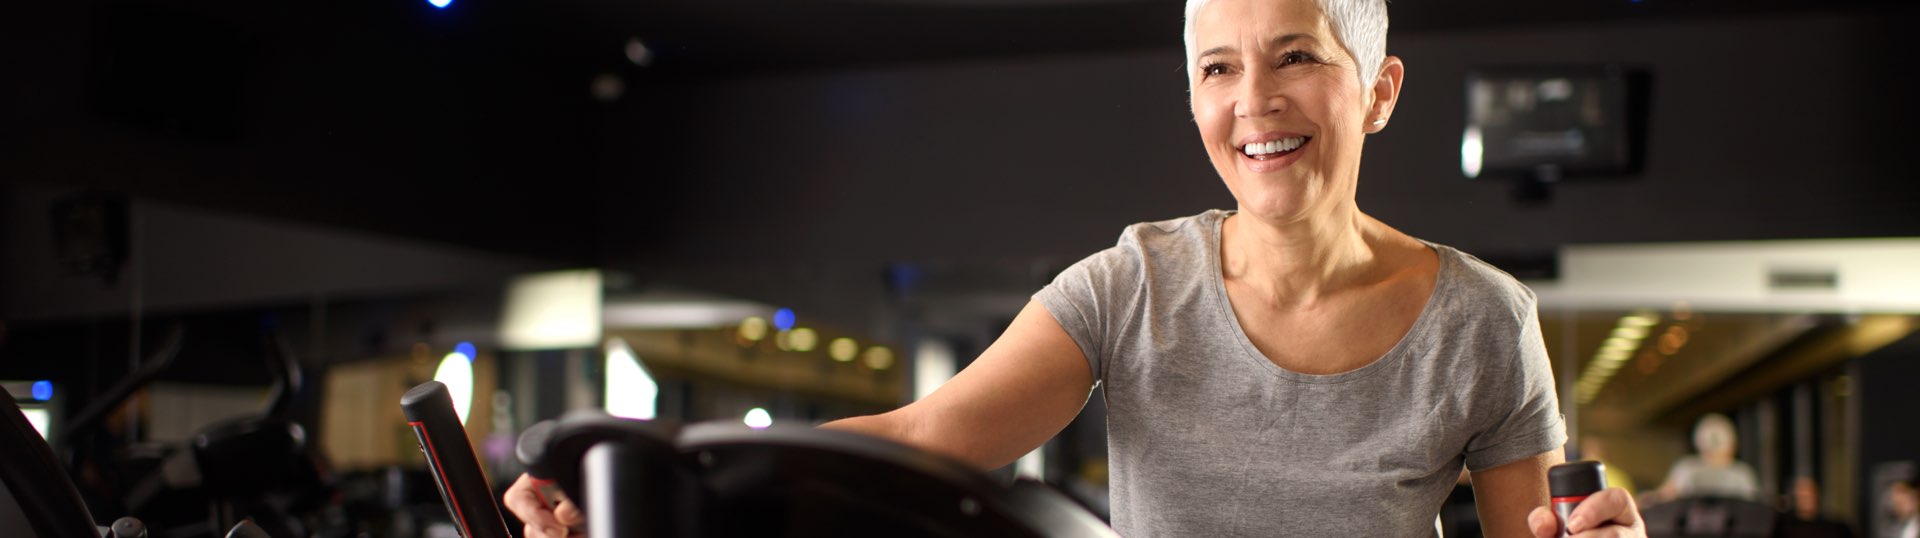 senior lady smiling as she works out on an elliptical